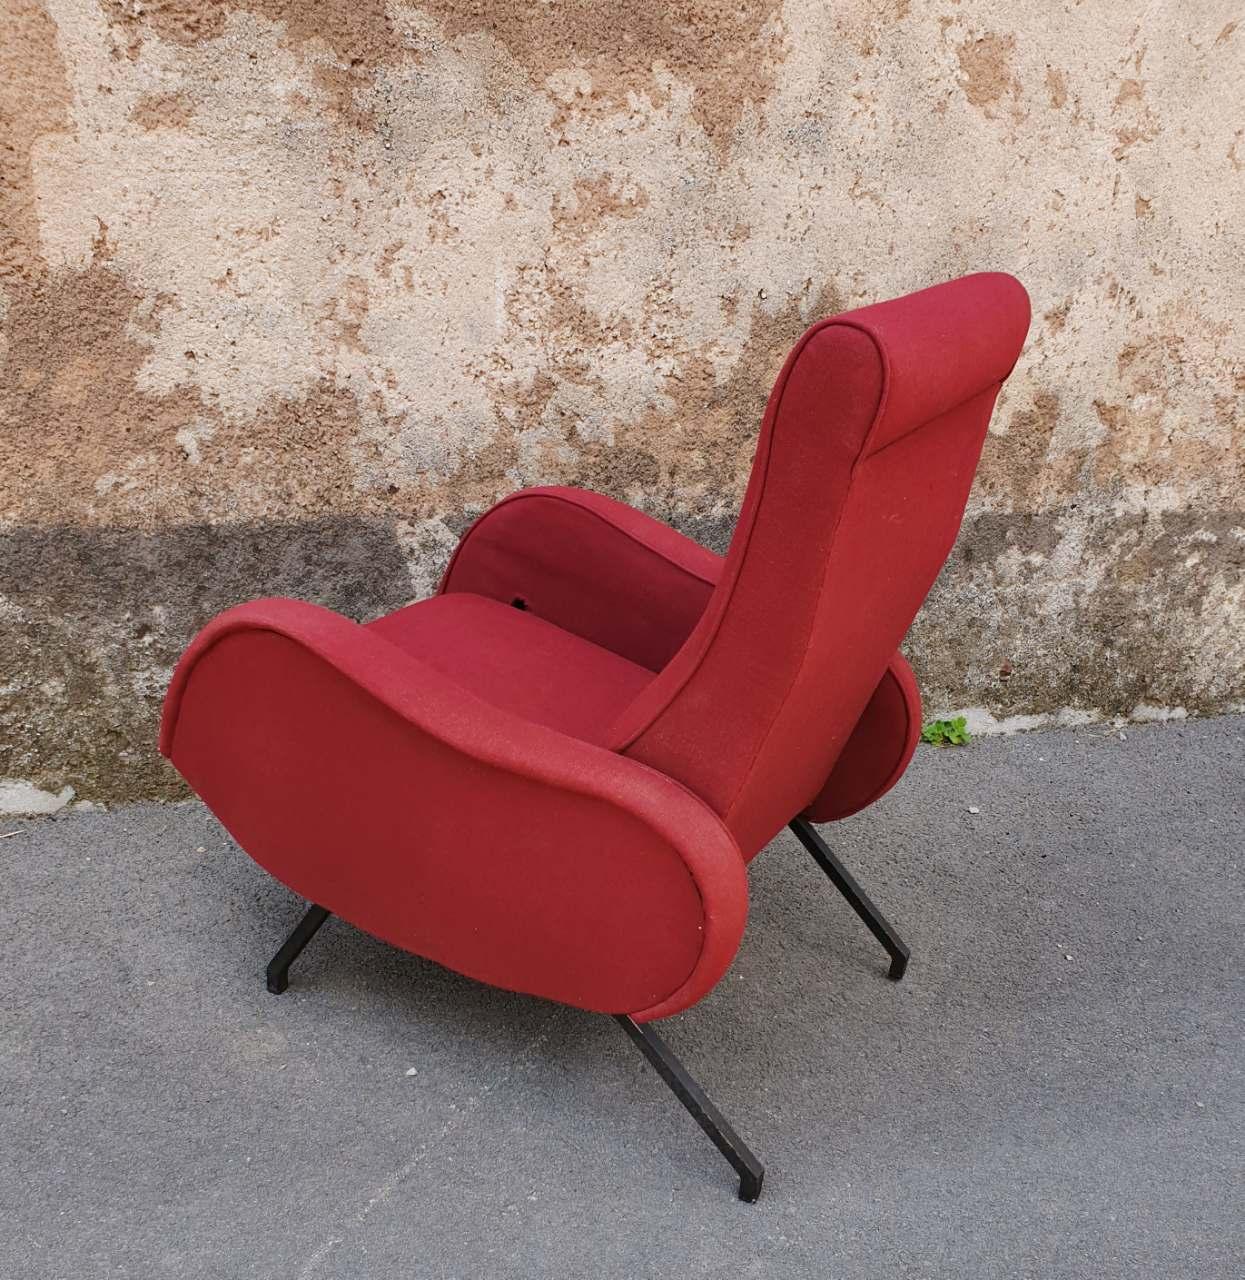 Mid-Century Modern Midcentury Red Reclining Armchair, Marco Zanuso Style, Studio Pizzoli Italy 60s For Sale